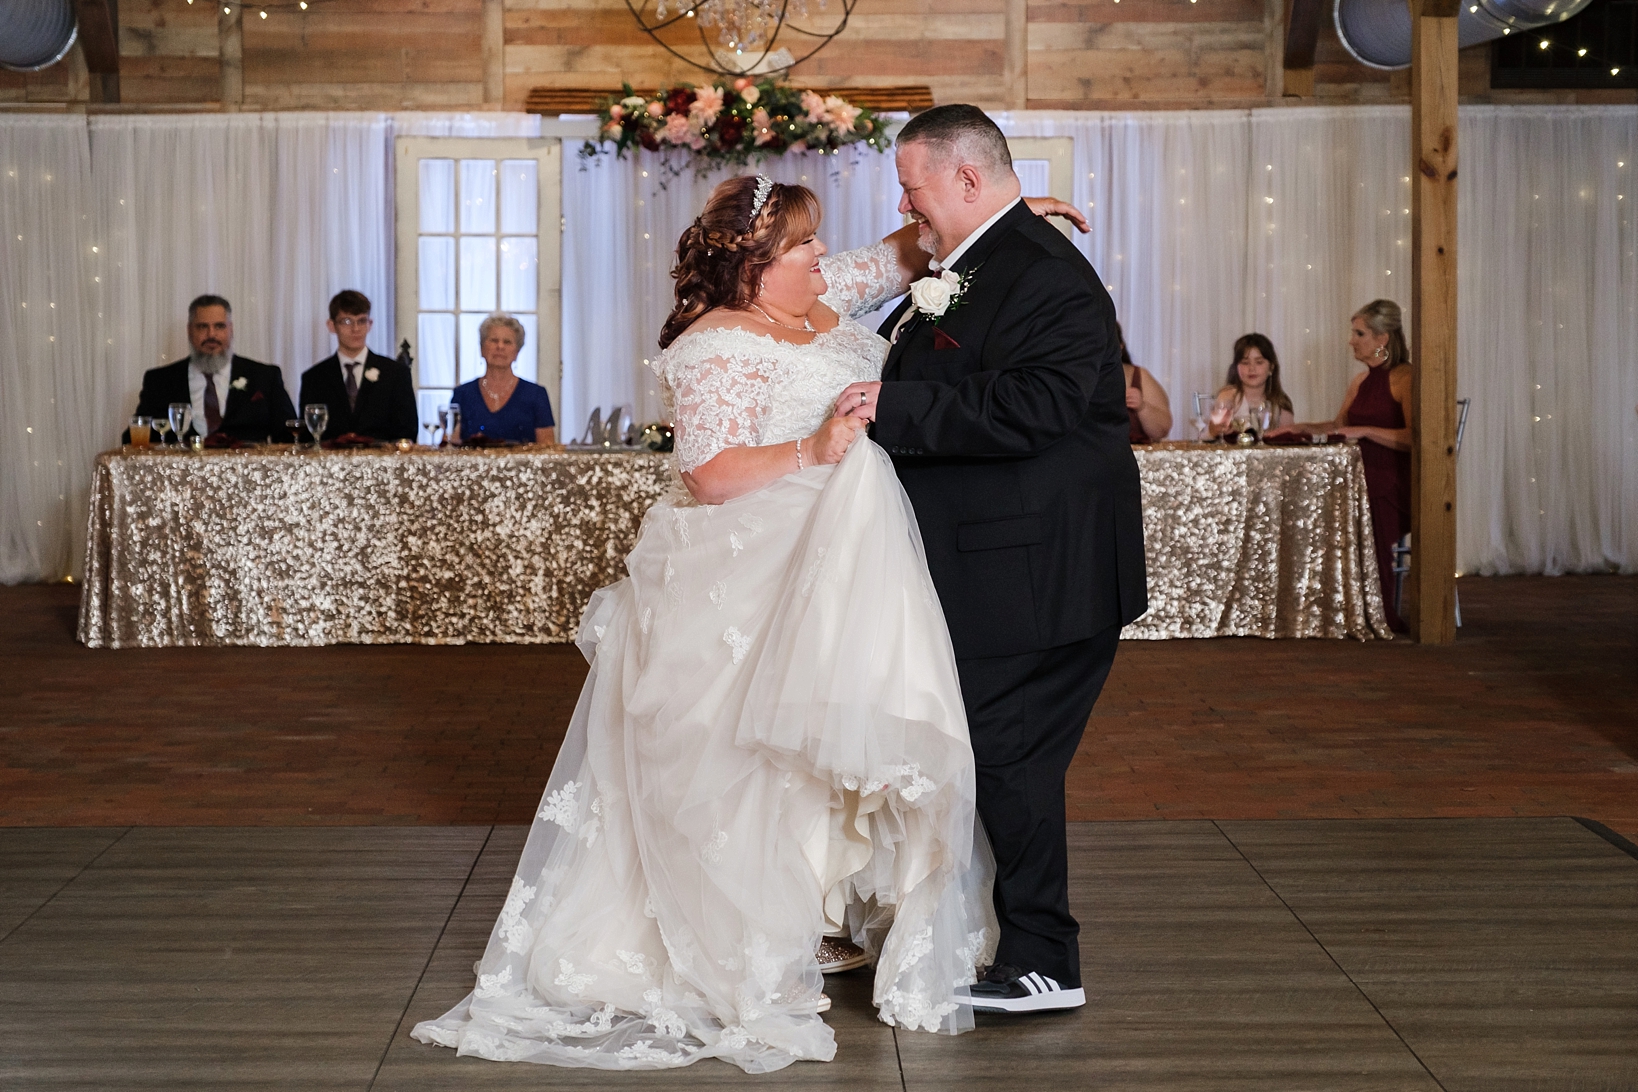 Bride and Groom dance during their cross creek wedding celebration as their family and friends watch on